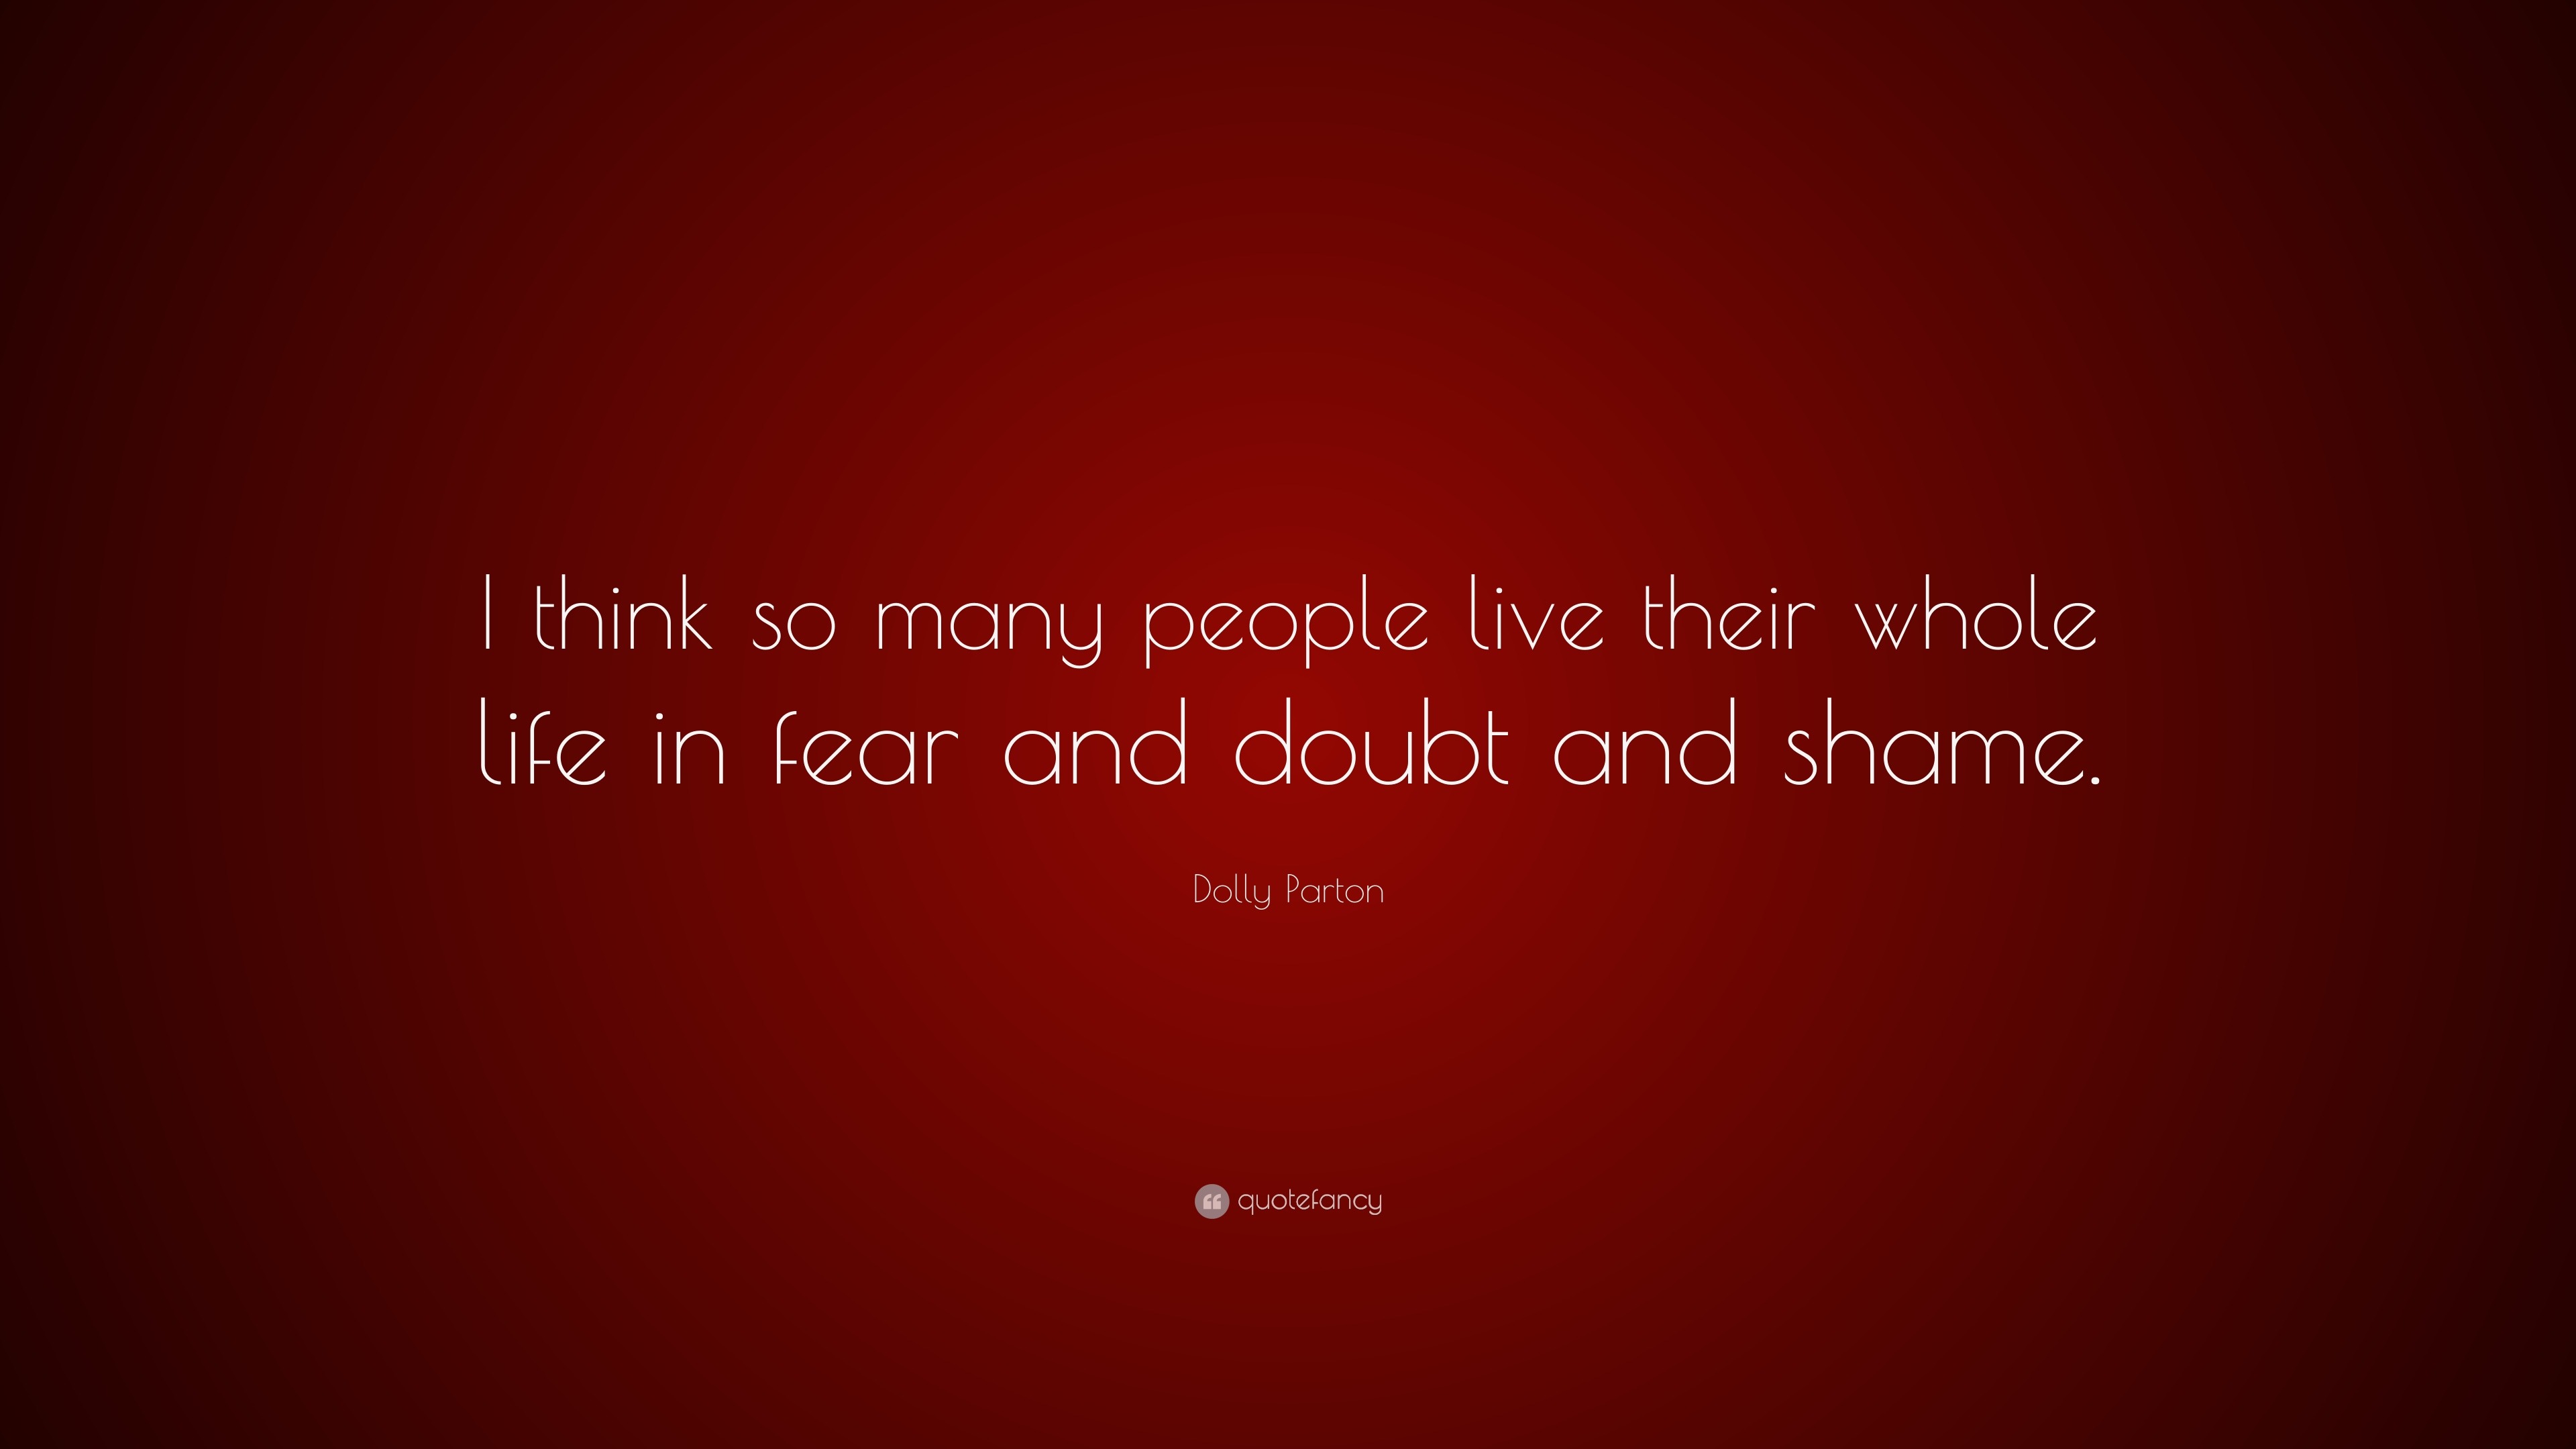 Dolly Parton Quote: “I think so many people live their whole life in ...